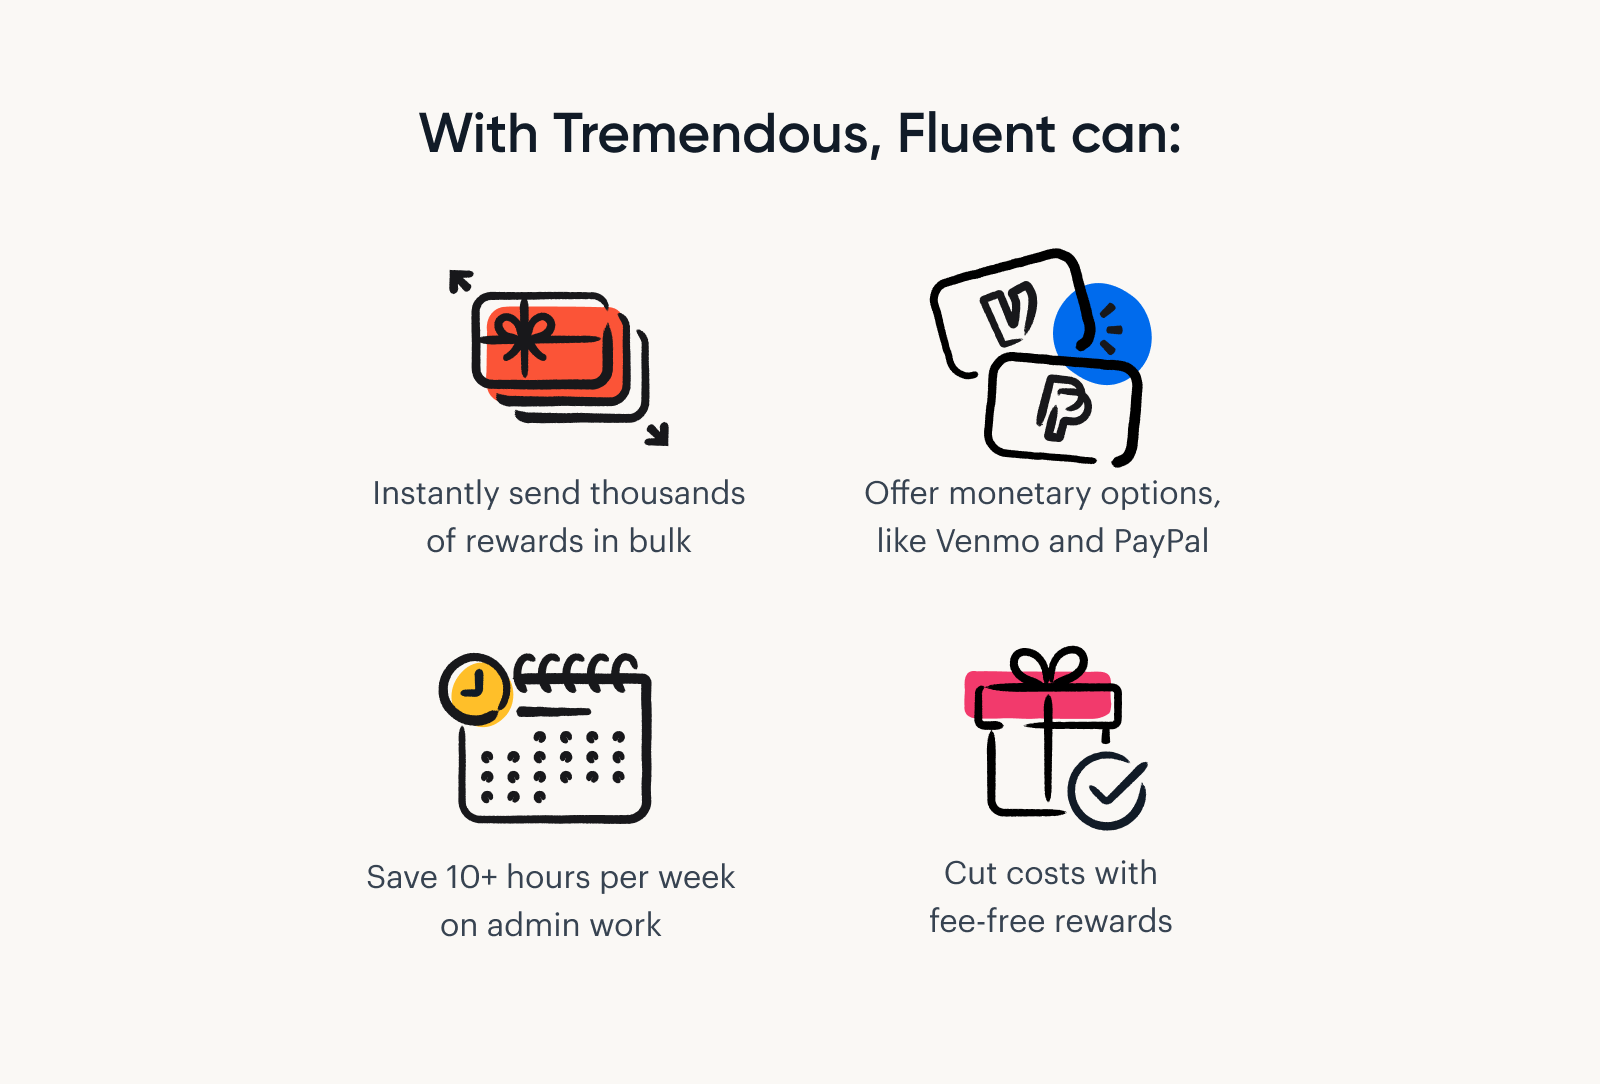 With Tremendous, Fluent can instantly send thousands of rewards in bulk, offer monetary options, like Venmo and PayPal, save 10+ hours per week on admin work, and cut costs with fee-free rewards.